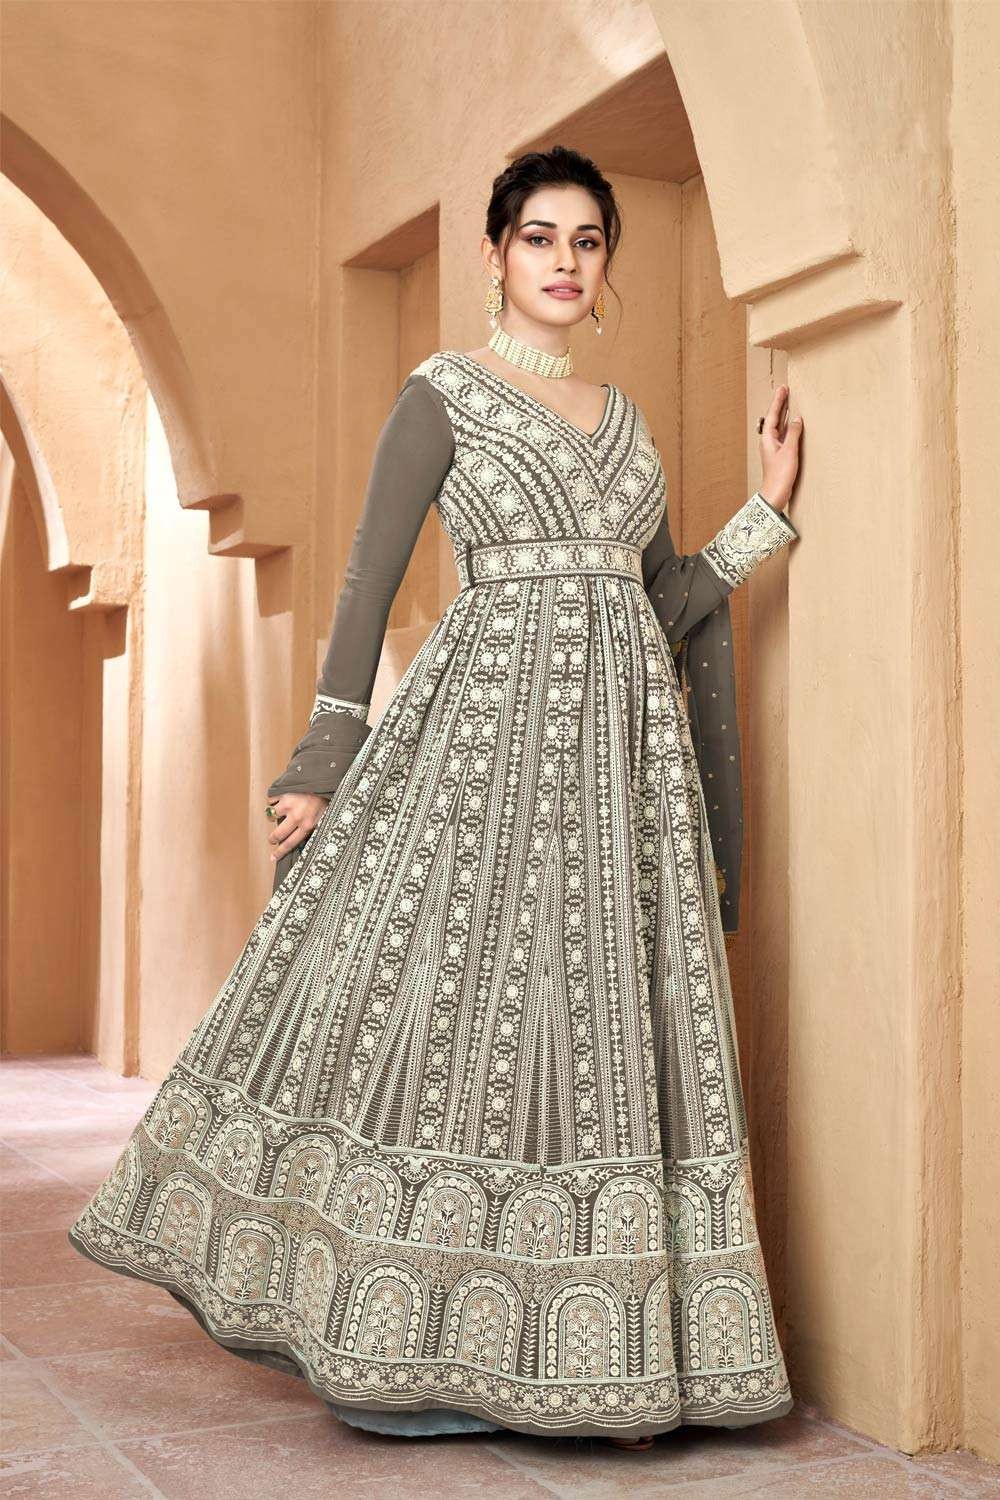 https://media.shopkund.com/media/catalog/product/cache/3/image/9df78eab33525d08d6e5fb8d27136e95/a/c/acw4092-1_grey-gown-dress-in-georgette-with-embroidered-gw0500_1_.jpg